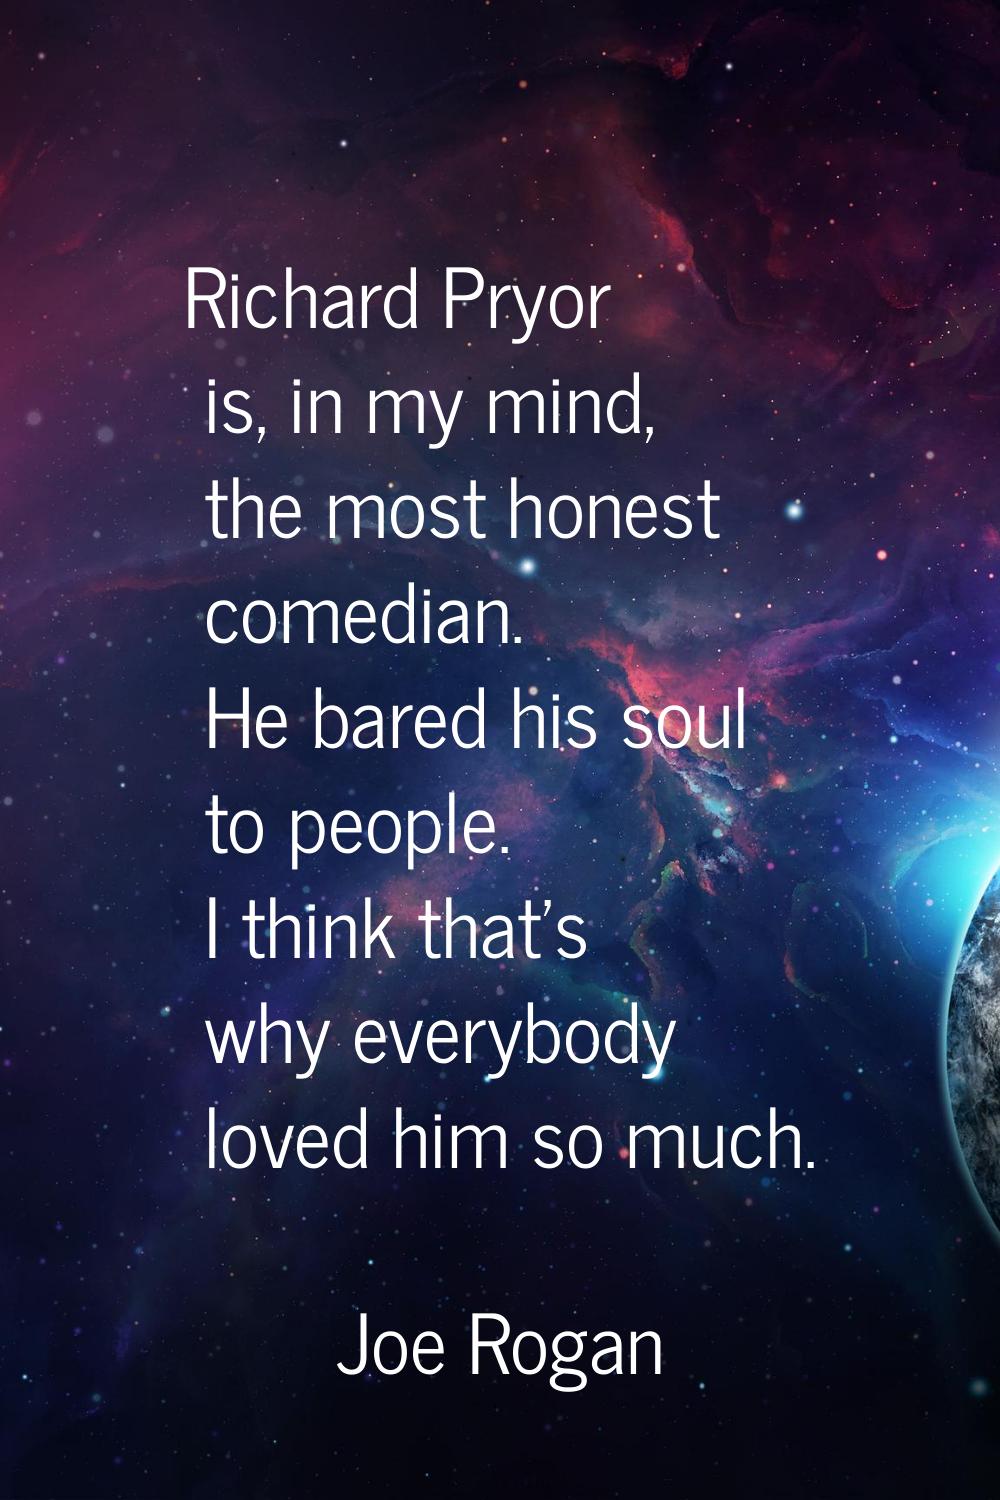 Richard Pryor is, in my mind, the most honest comedian. He bared his soul to people. I think that's